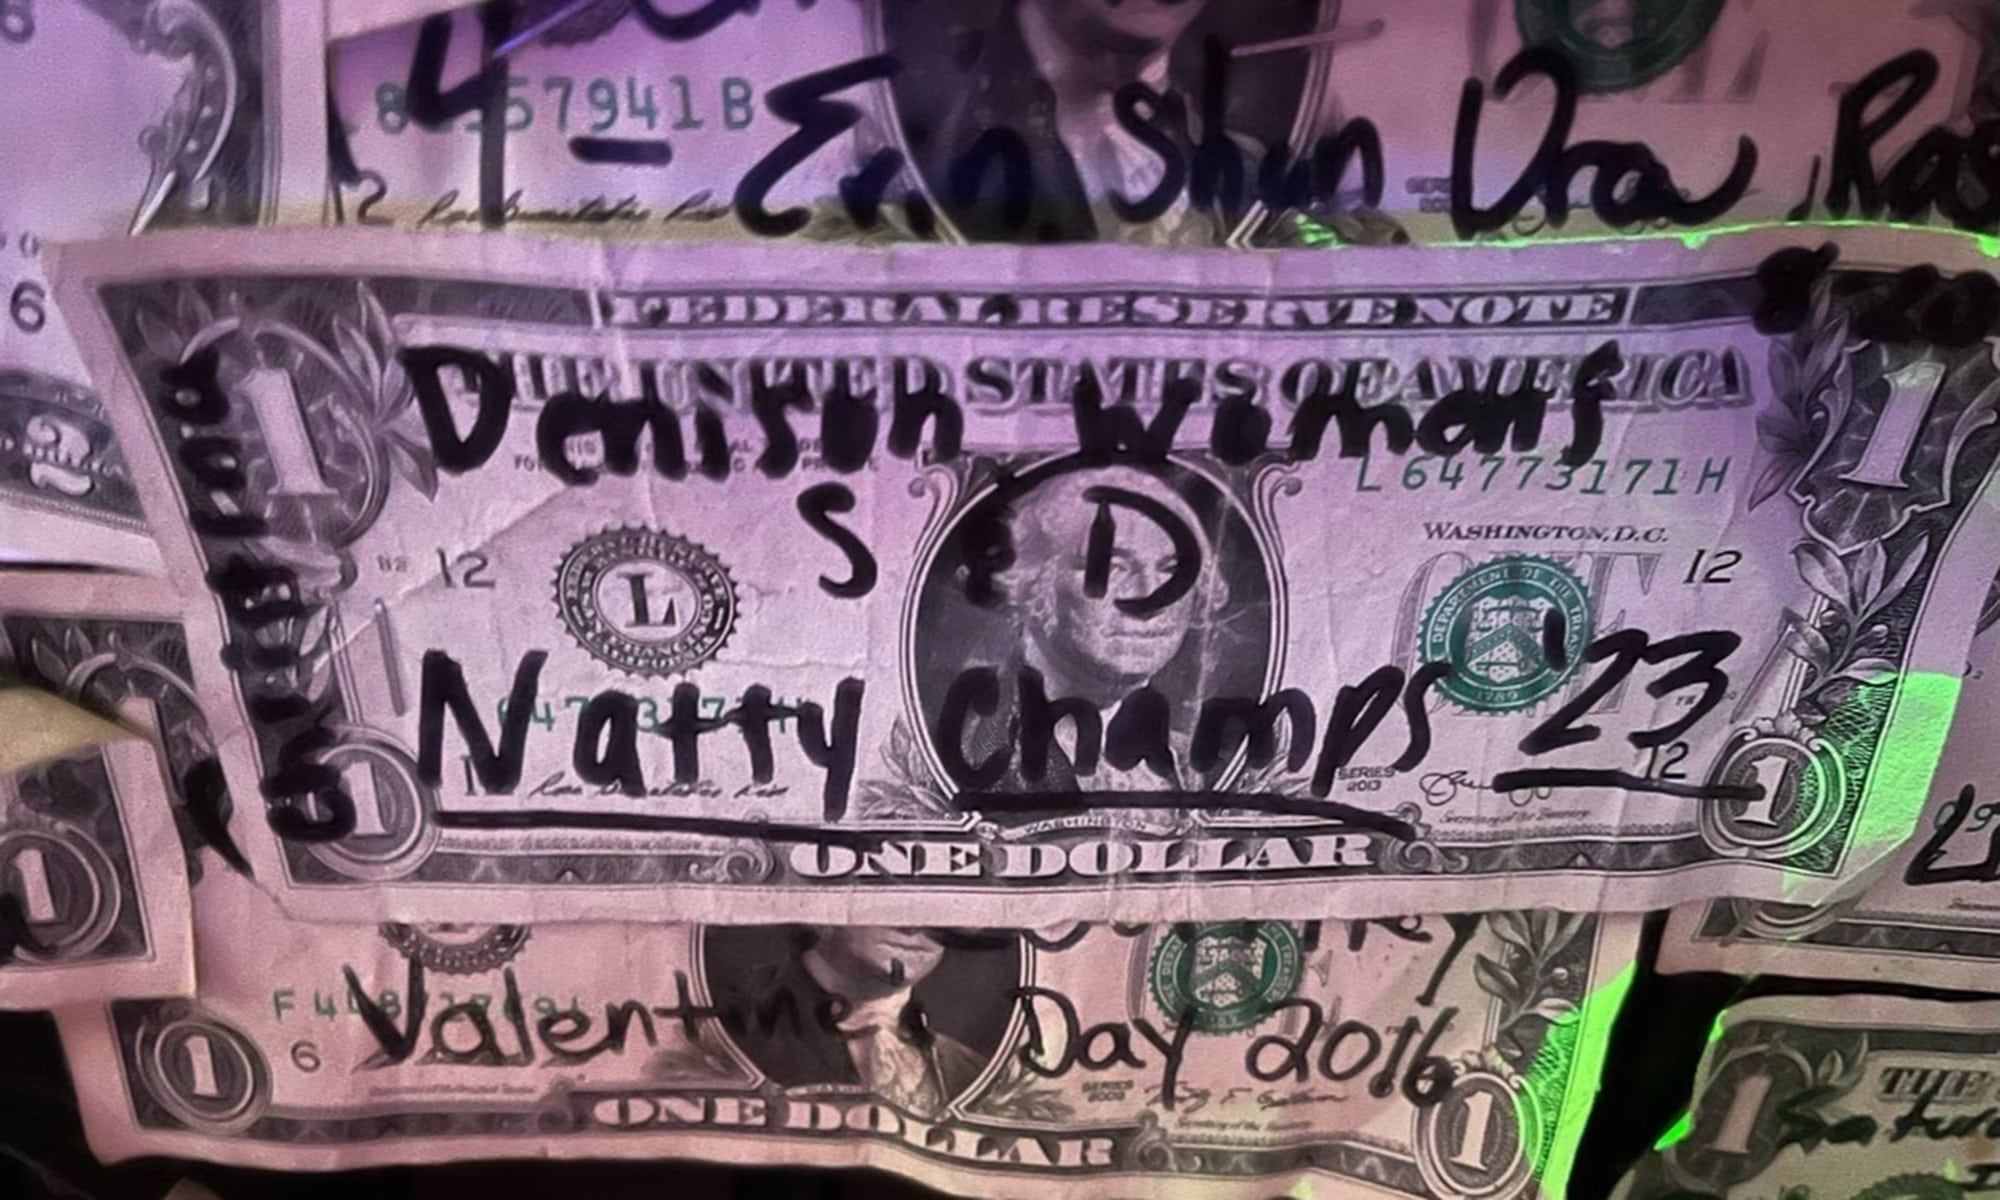 A dollar bill pasted on the wall that reads 'Denison Women’s S & D (Team) Natty Champs ’23'